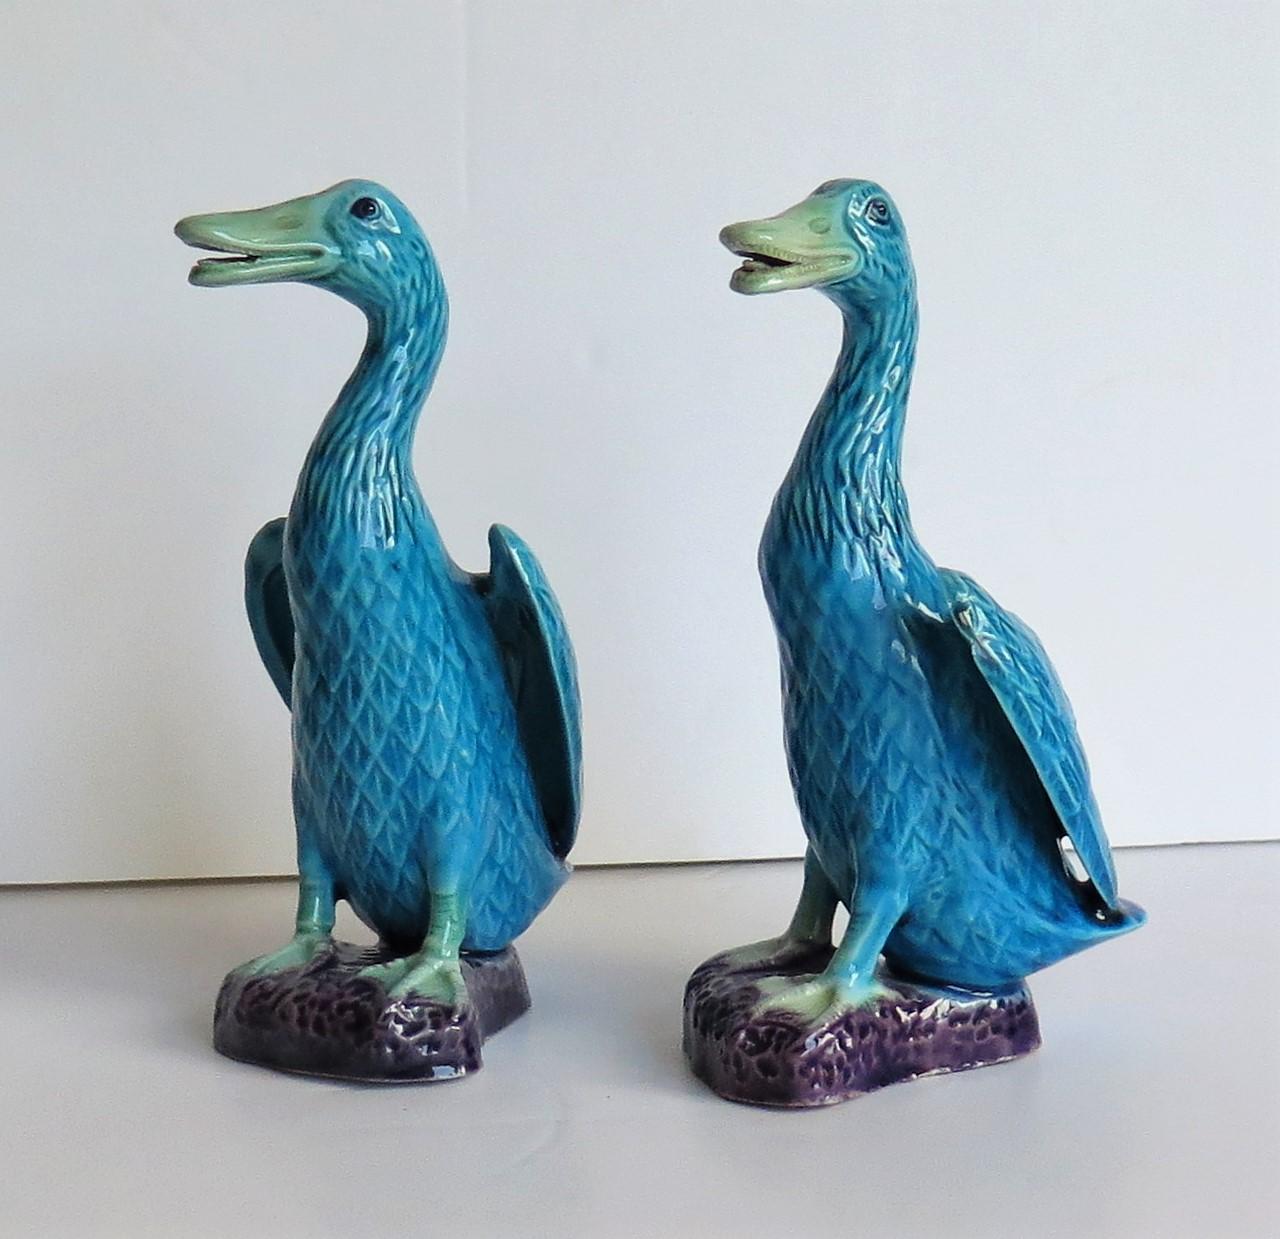 This are two different Chinese export porcelain goose birds, decorated in polychrome enamels and dating to the 1950s.

The bird figurines are both well modelled in different positions and very life like, with the goose standing upright on a rocky